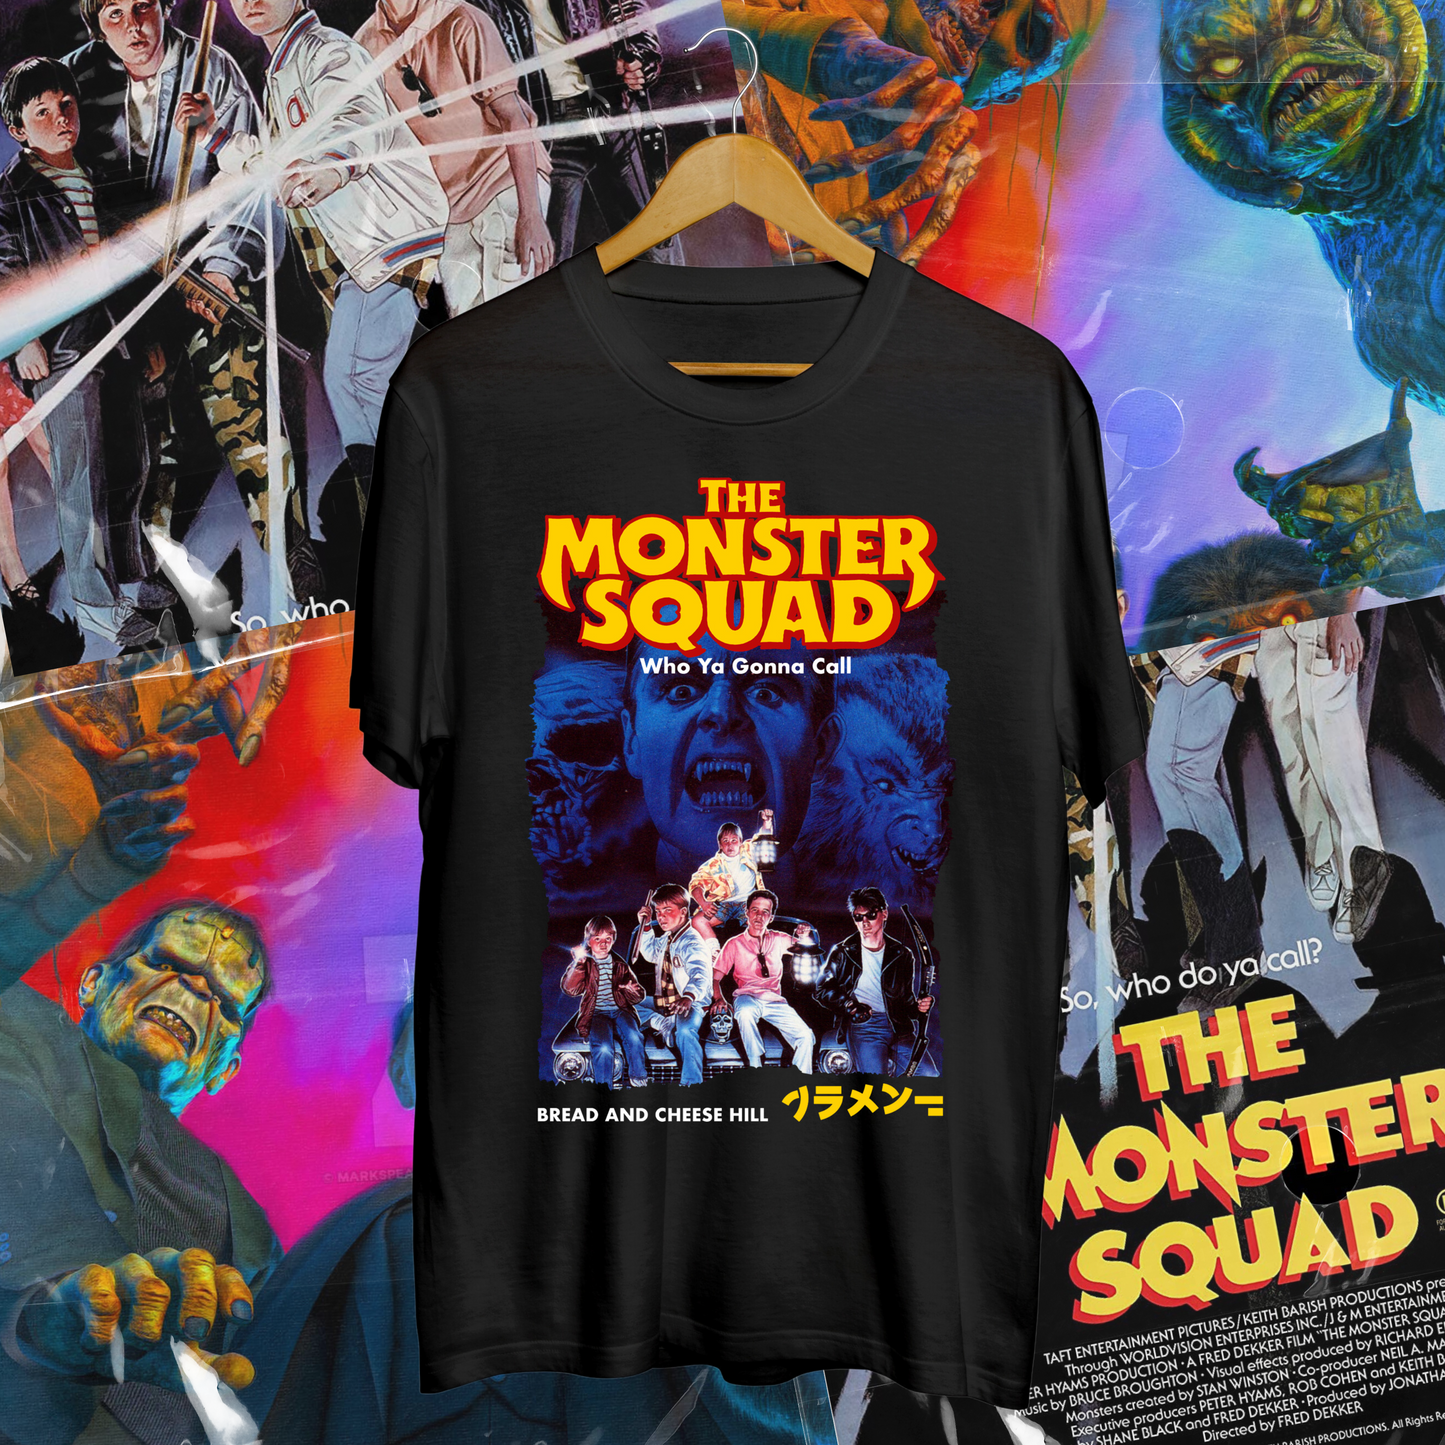 The Monster Squad Movie  - BACH T-ShirtBread And Cheese Hill